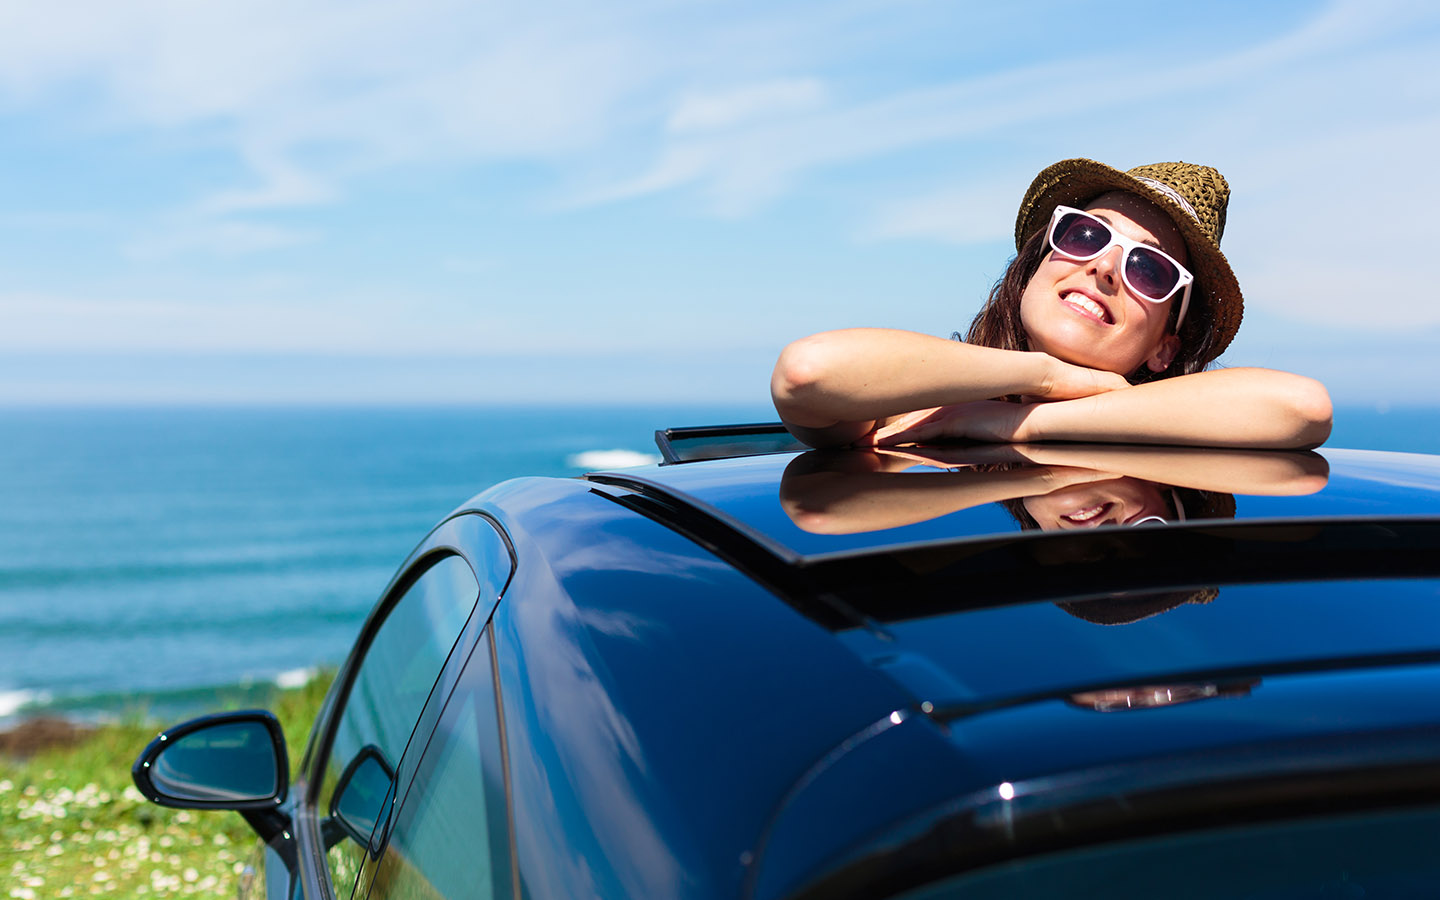 car sunroofs offer a sense of openness and add appeal to the exterior